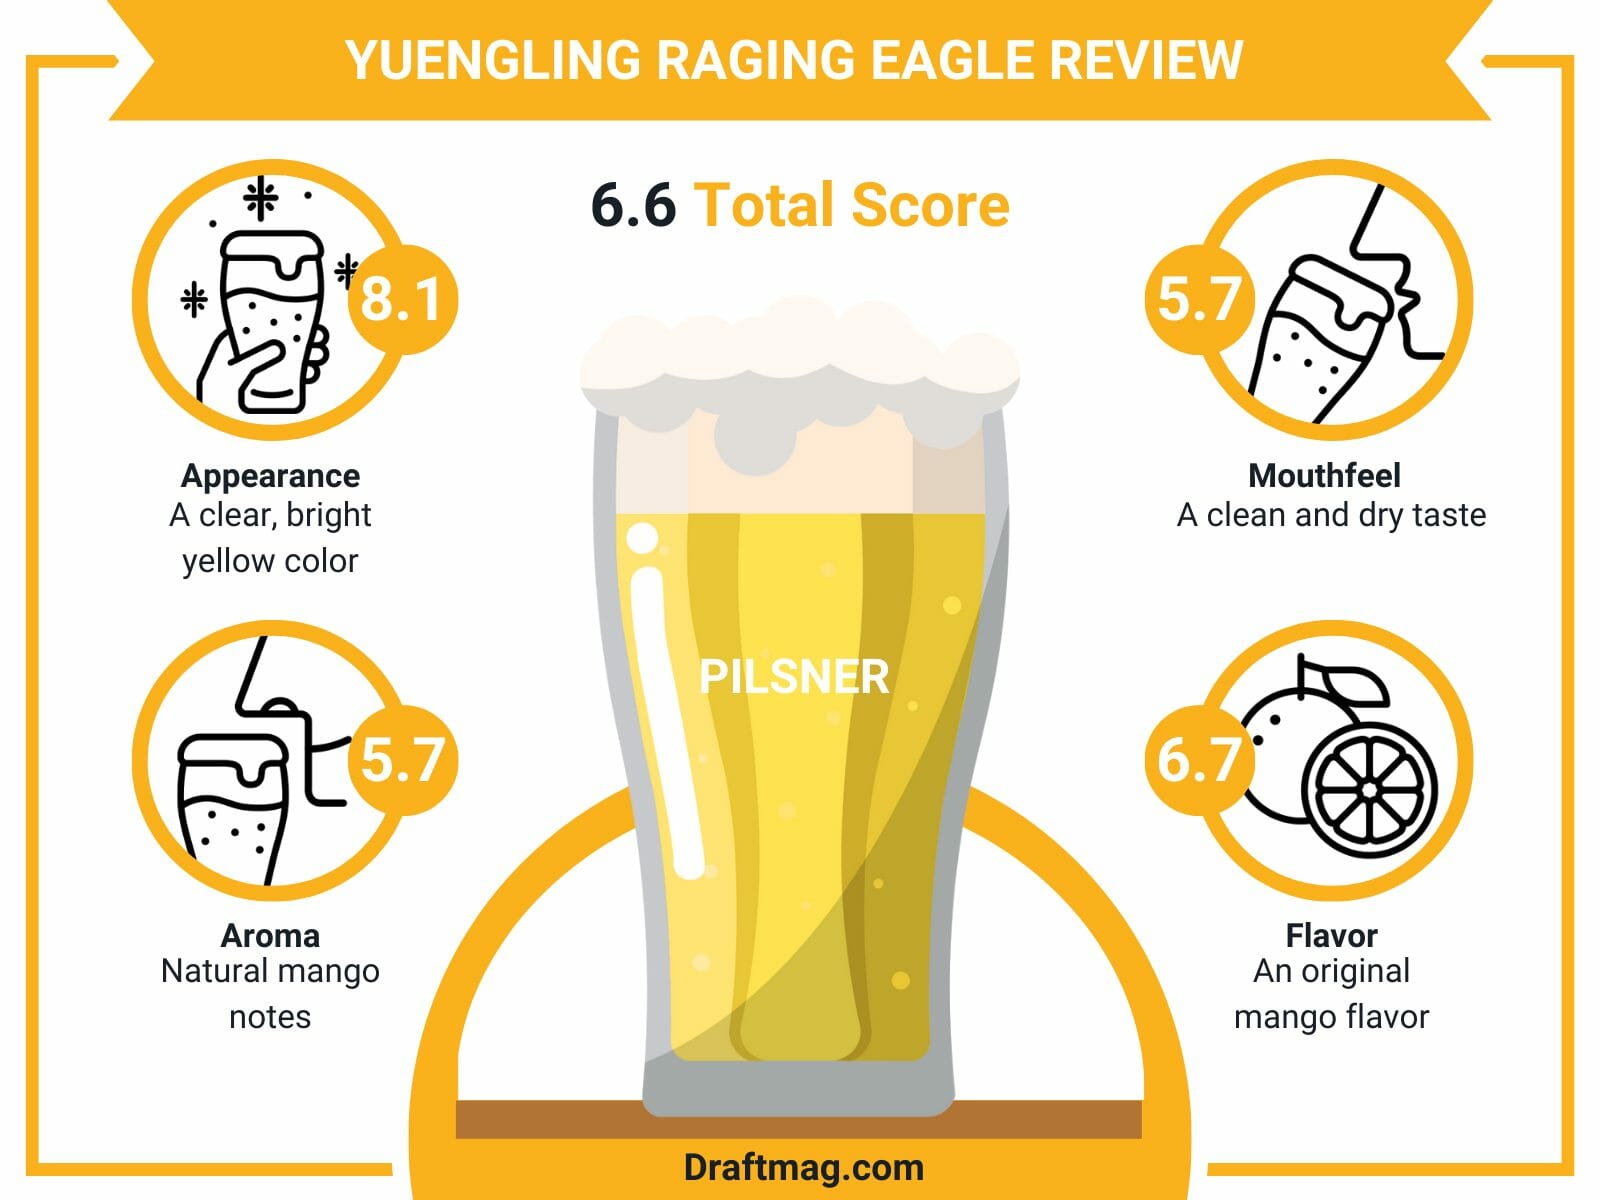 Yuengling Raging Eagle Review Infographic